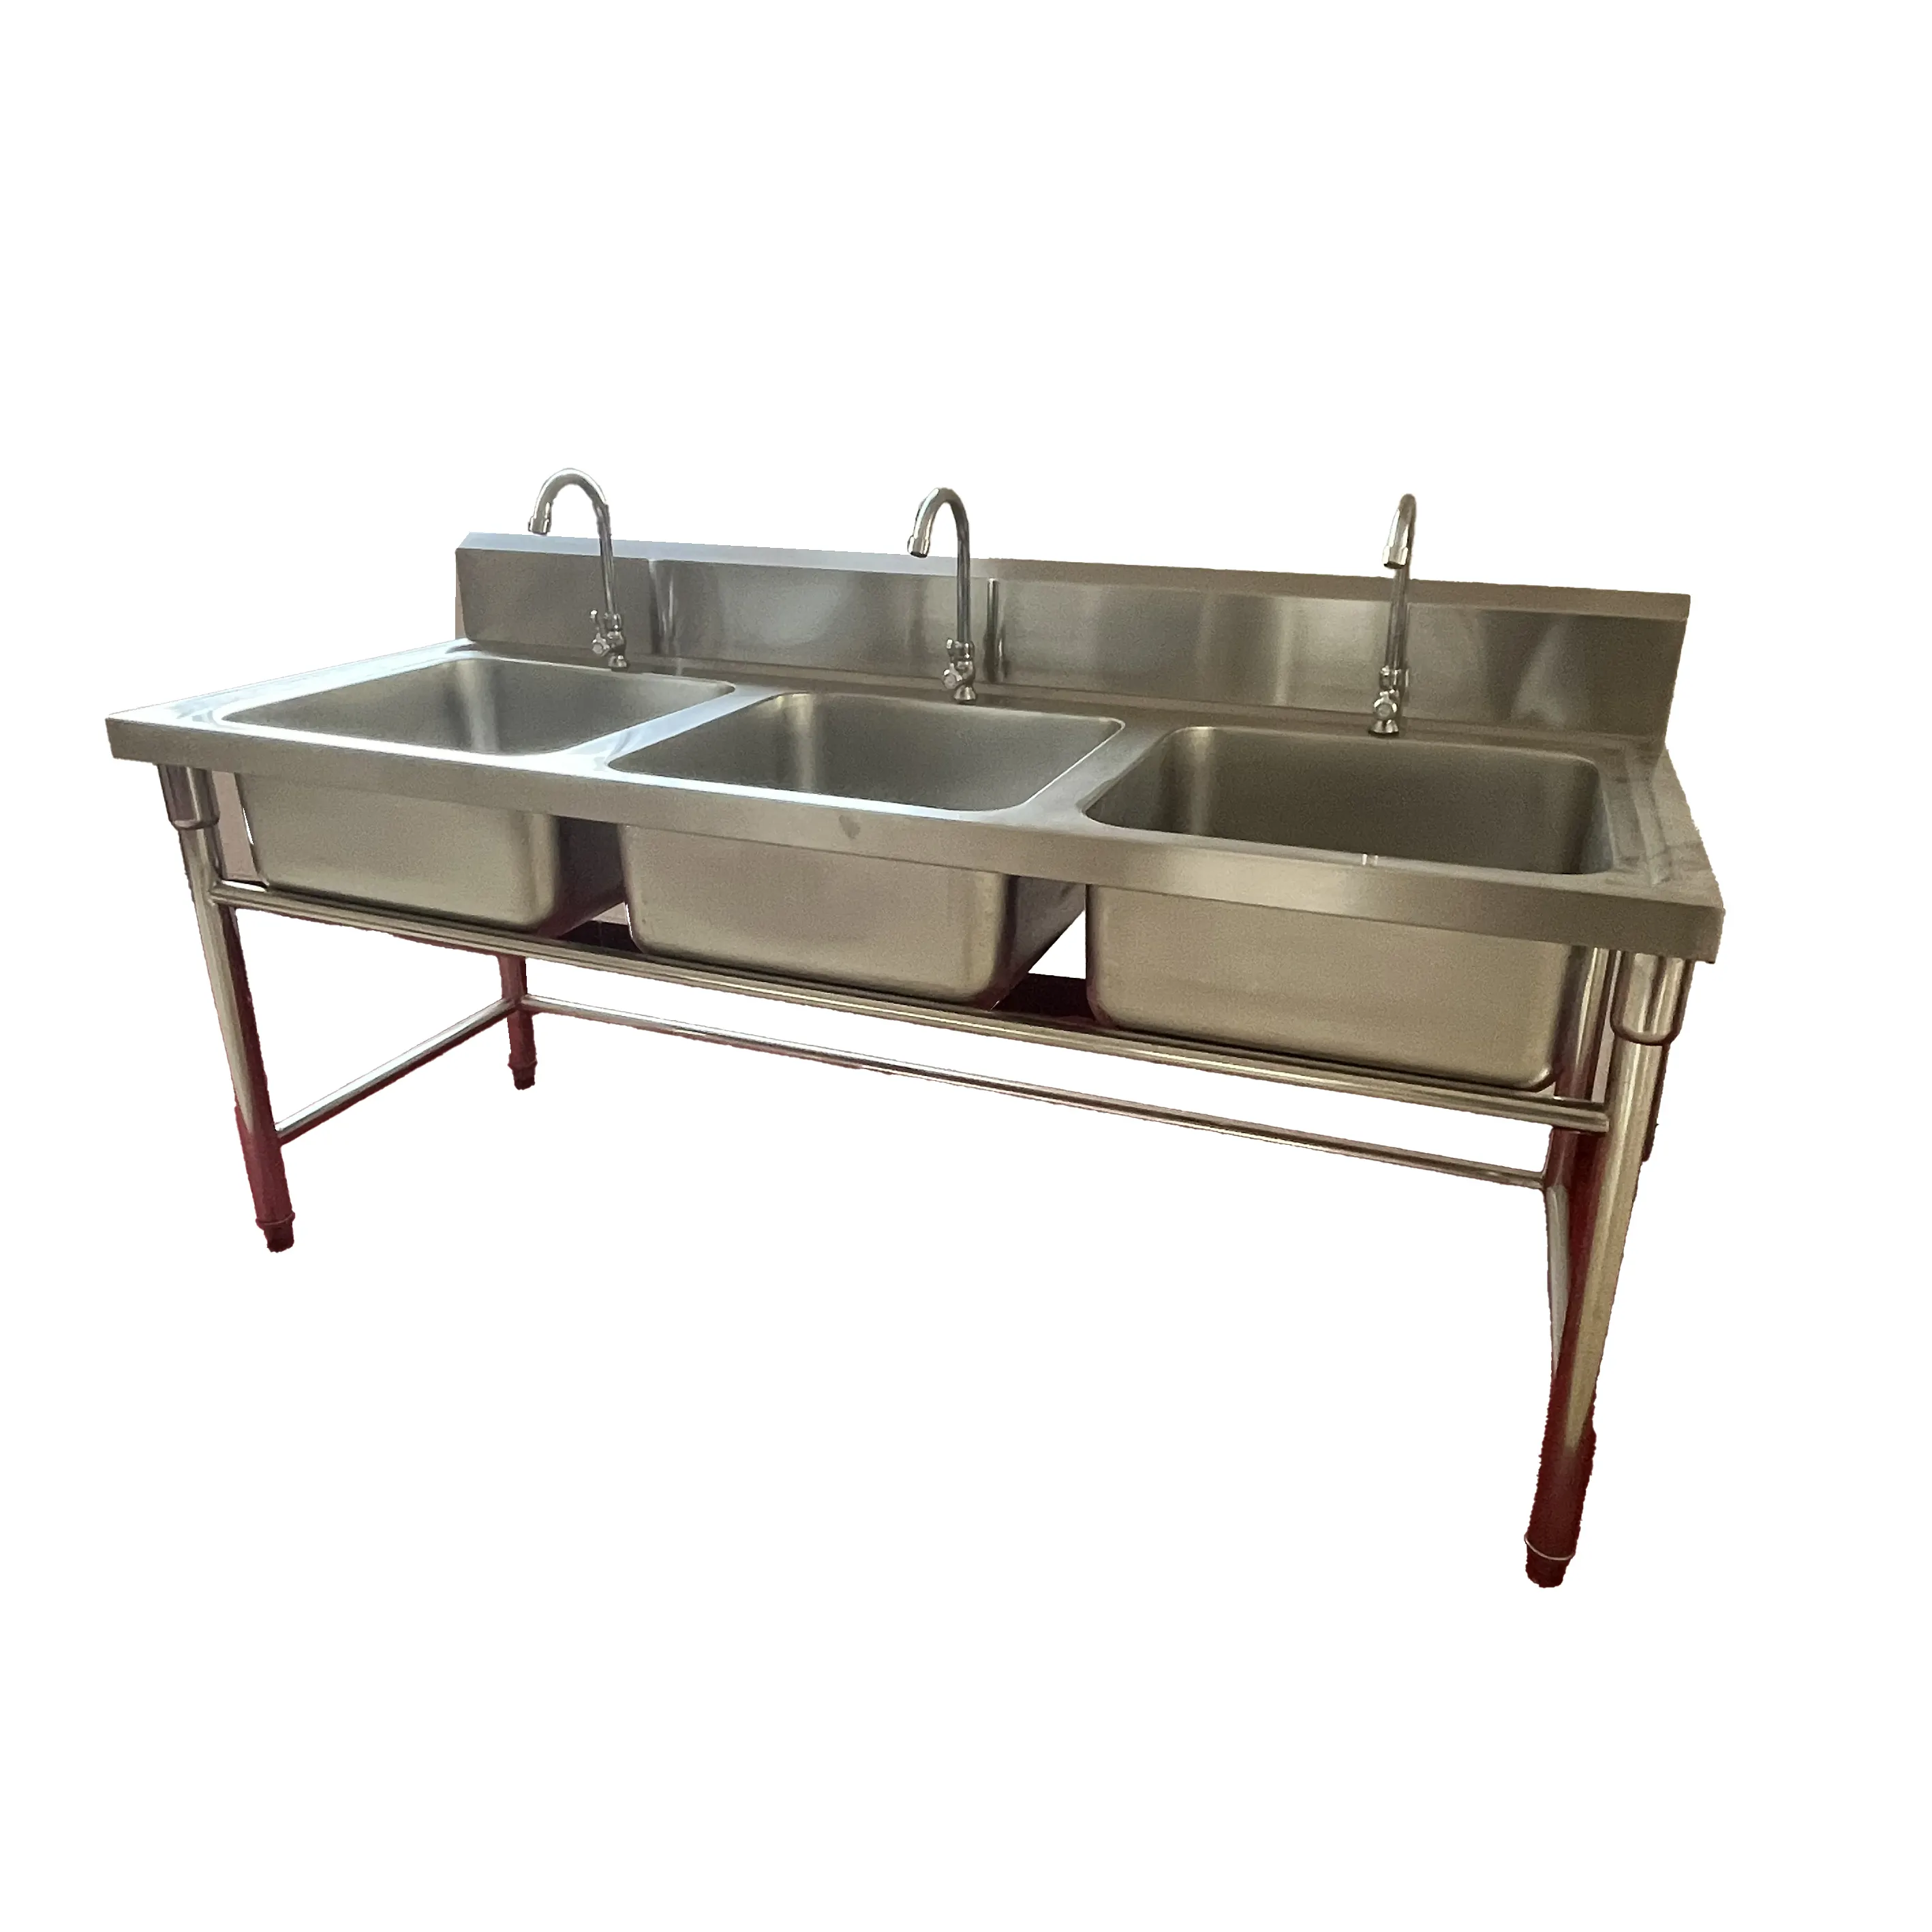 Three Compartment Stainless Steel Triple Bowl Commercial Utility Sink